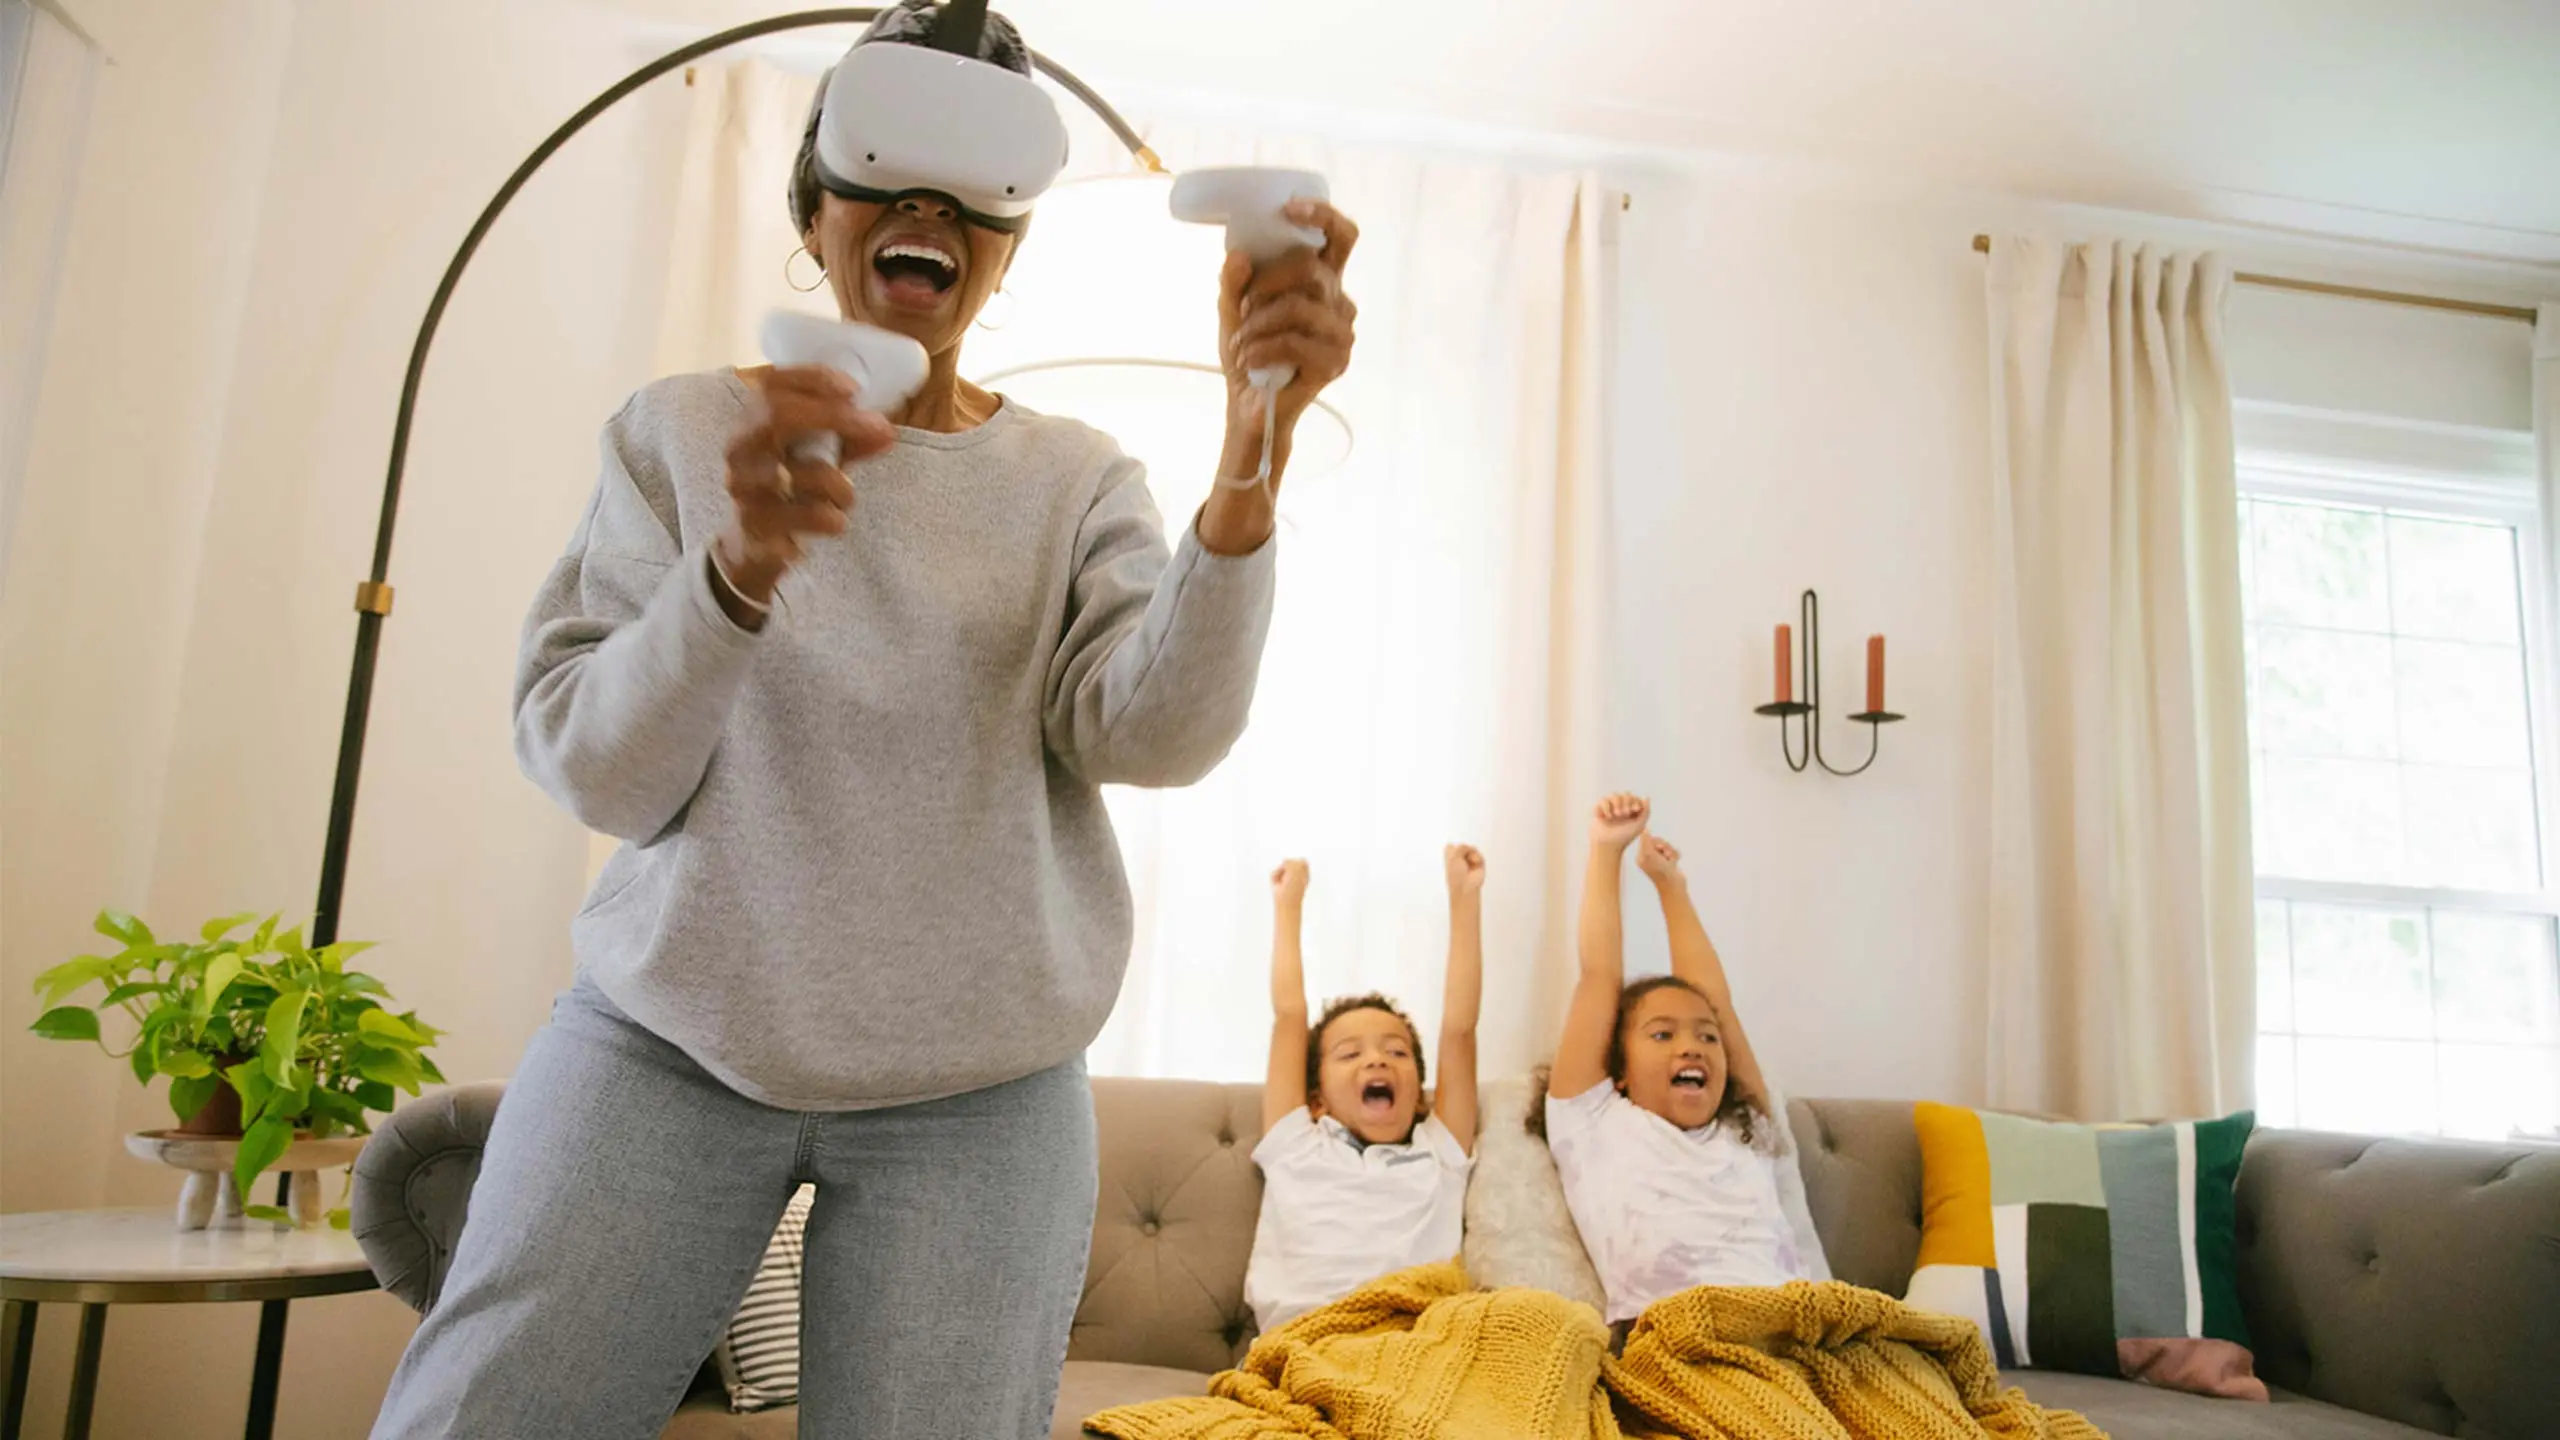 Grandchildren cheering on grandparent while playing with VR headset